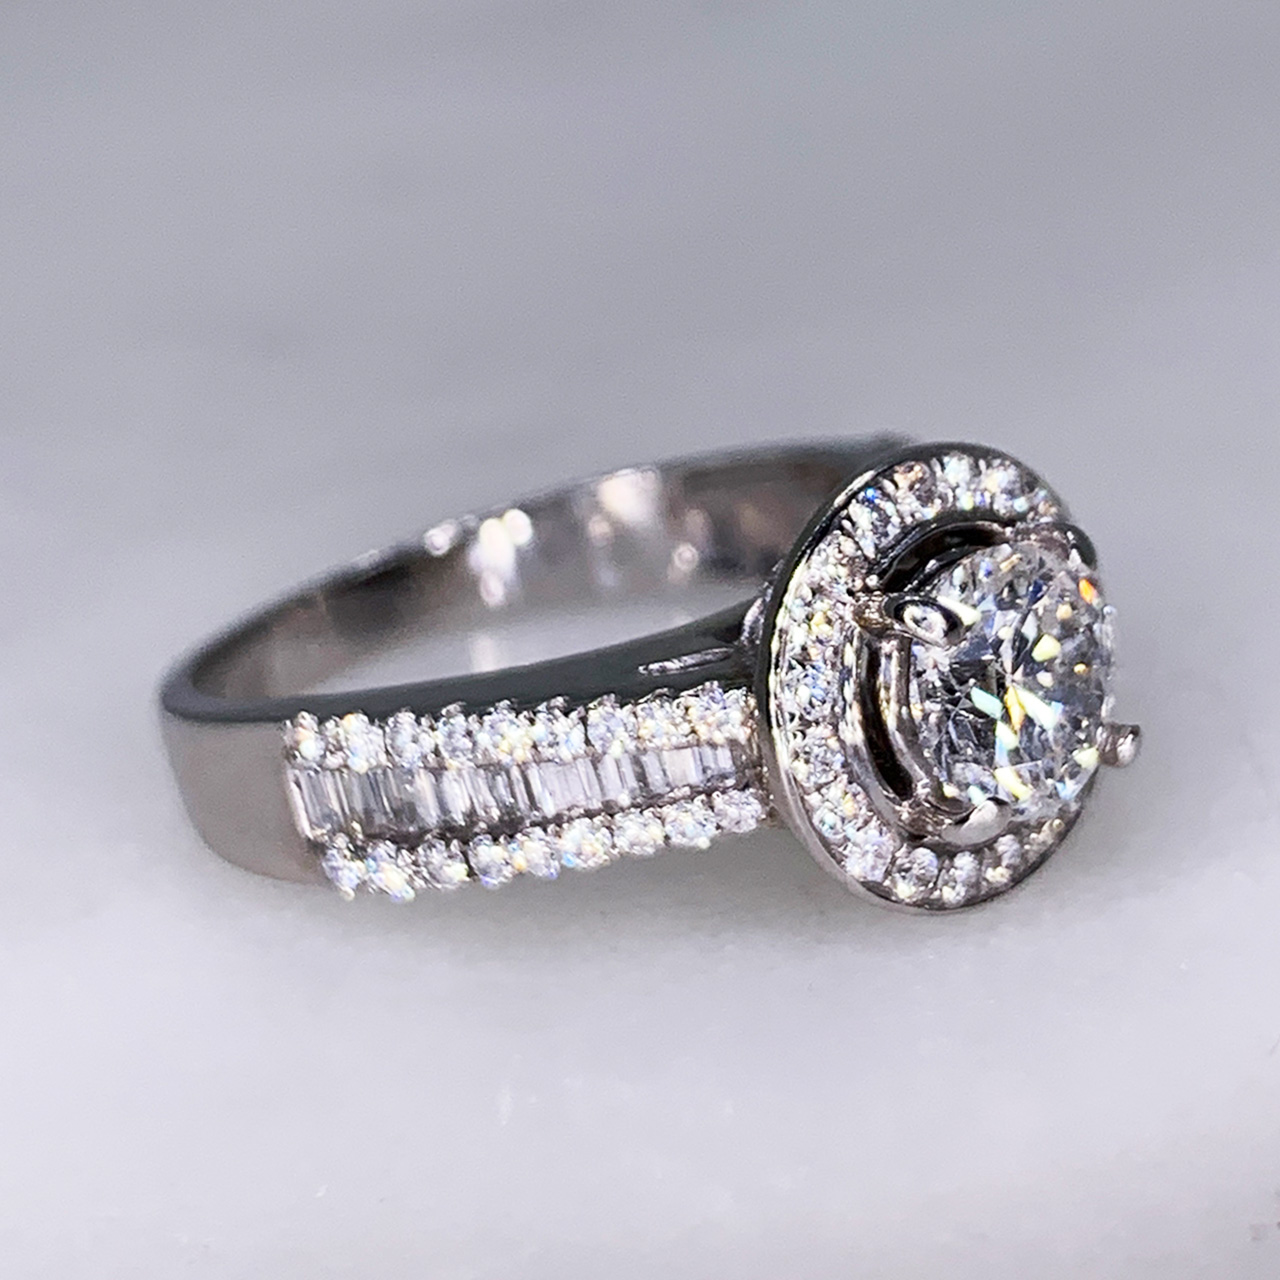 Stunning Diamond Halo Cluster Ring in 18ct White Gold, Stamped 750 (for 18ct) in the shank. The central Diamond 0.77cts is claw set and surrounded by a cluster of diamonds. This ring is beautifully detailed with geometric baguette and round diamond set shoulders and diamond set detail underneath the top of the central setting. 